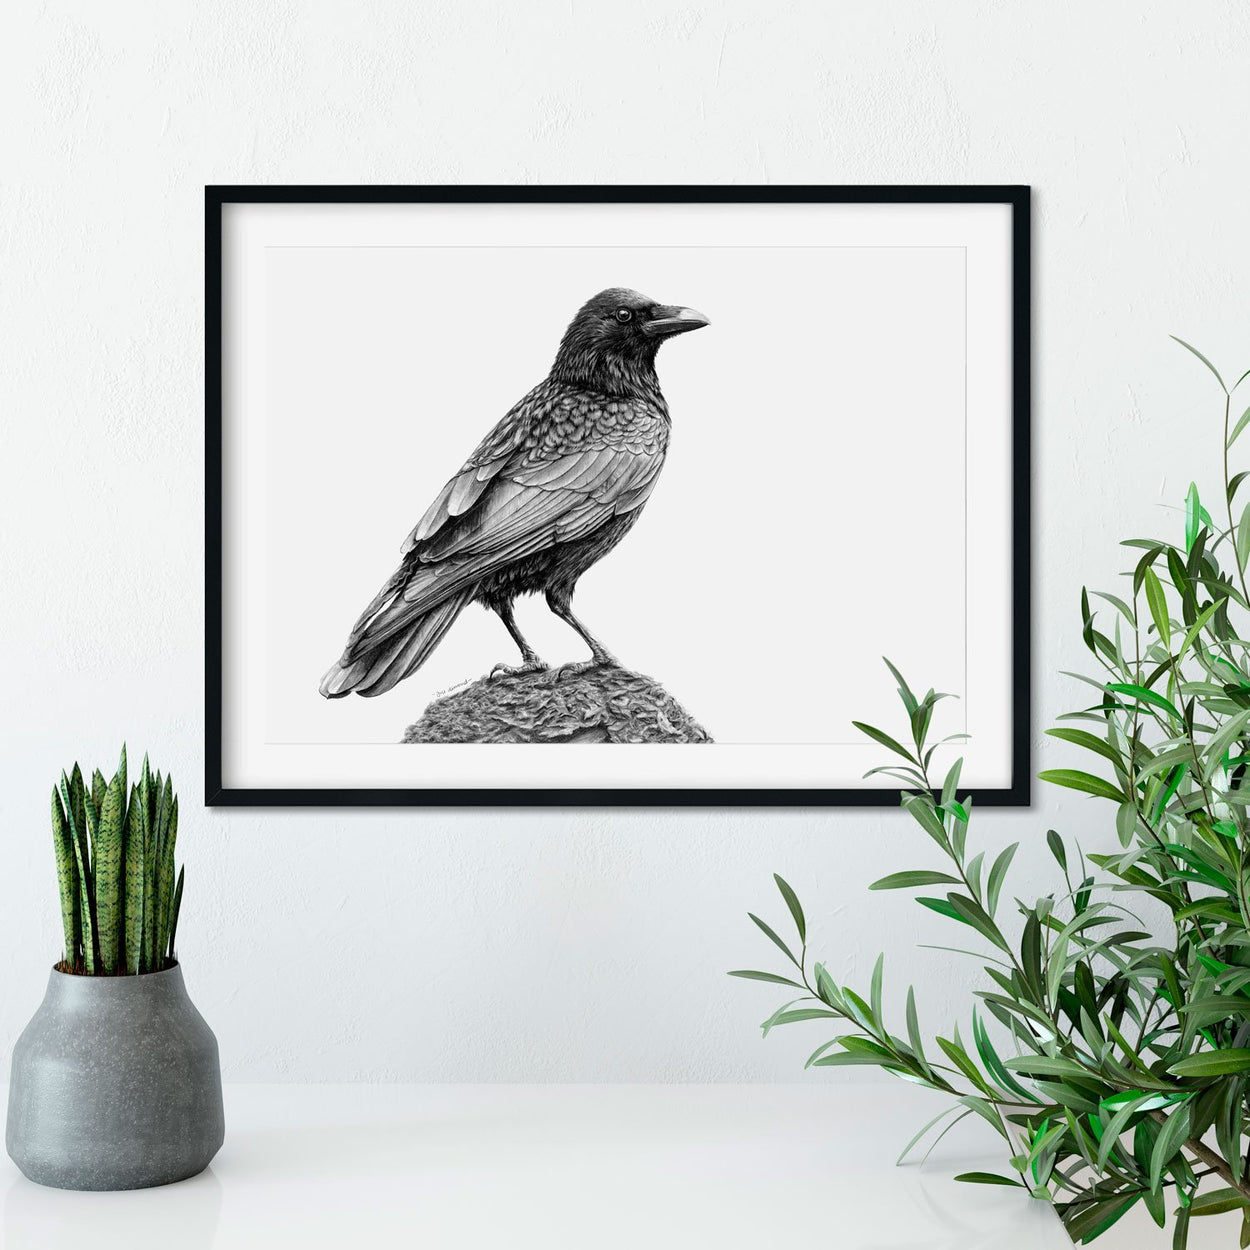 Crow Pencil Drawing on Wall - The Thriving Wild